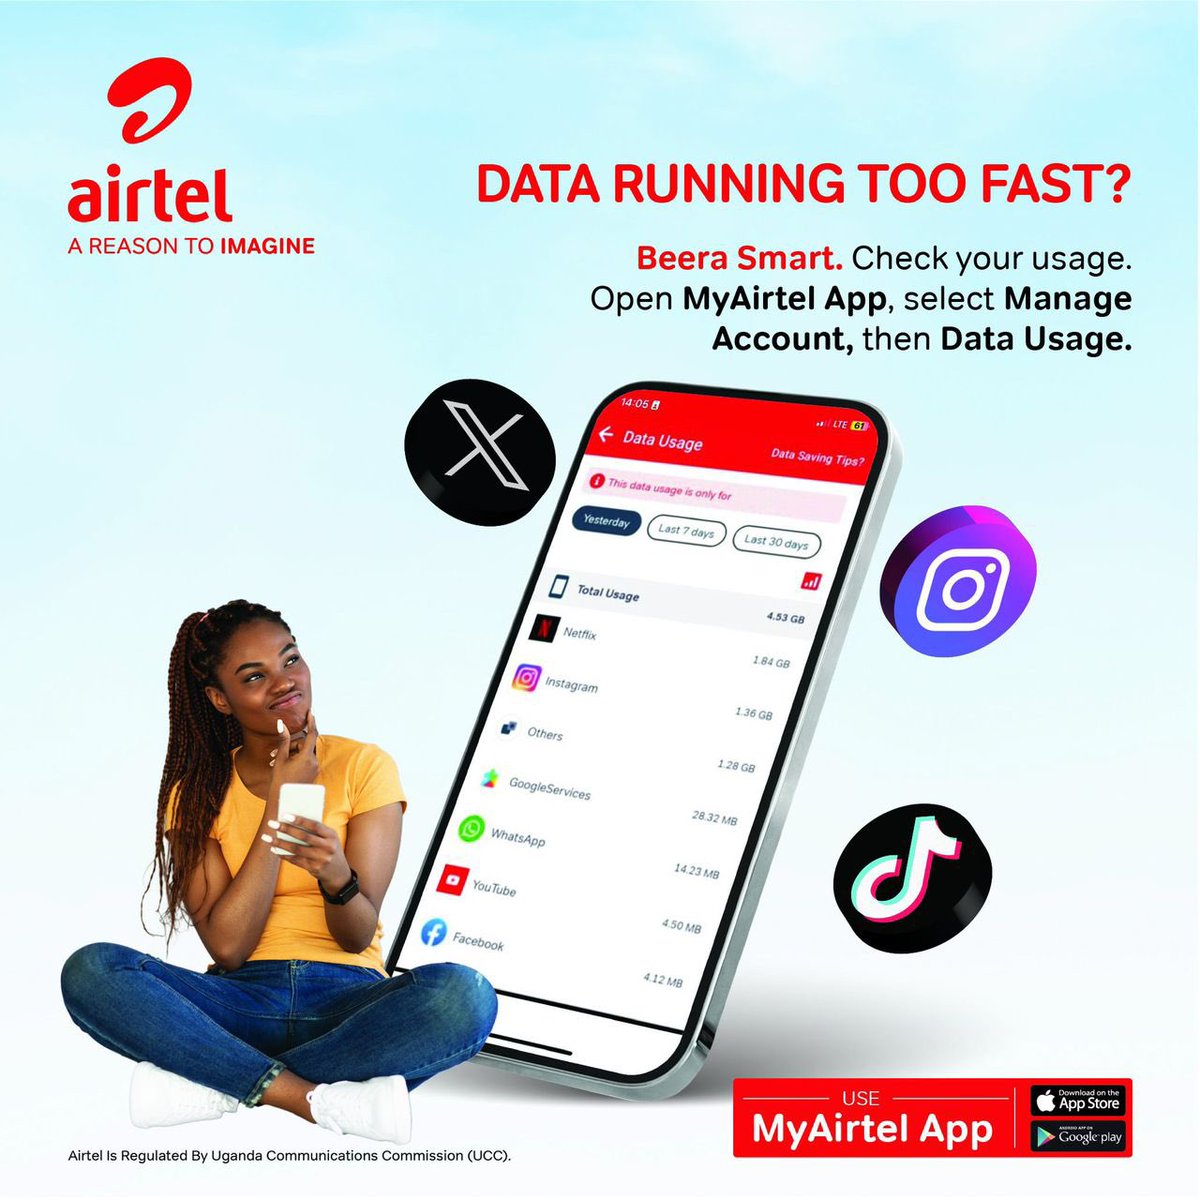 Is your Airtel Data running so fast, keep track of your data usage 📌📌

Seamlessly take charge of your data usage using the Data usage feature on #MyAirtelApp.
Download the App here airtelafrica.onelink.me/cGyr/qgj4qeu2 to start today

#AirtelDataManager